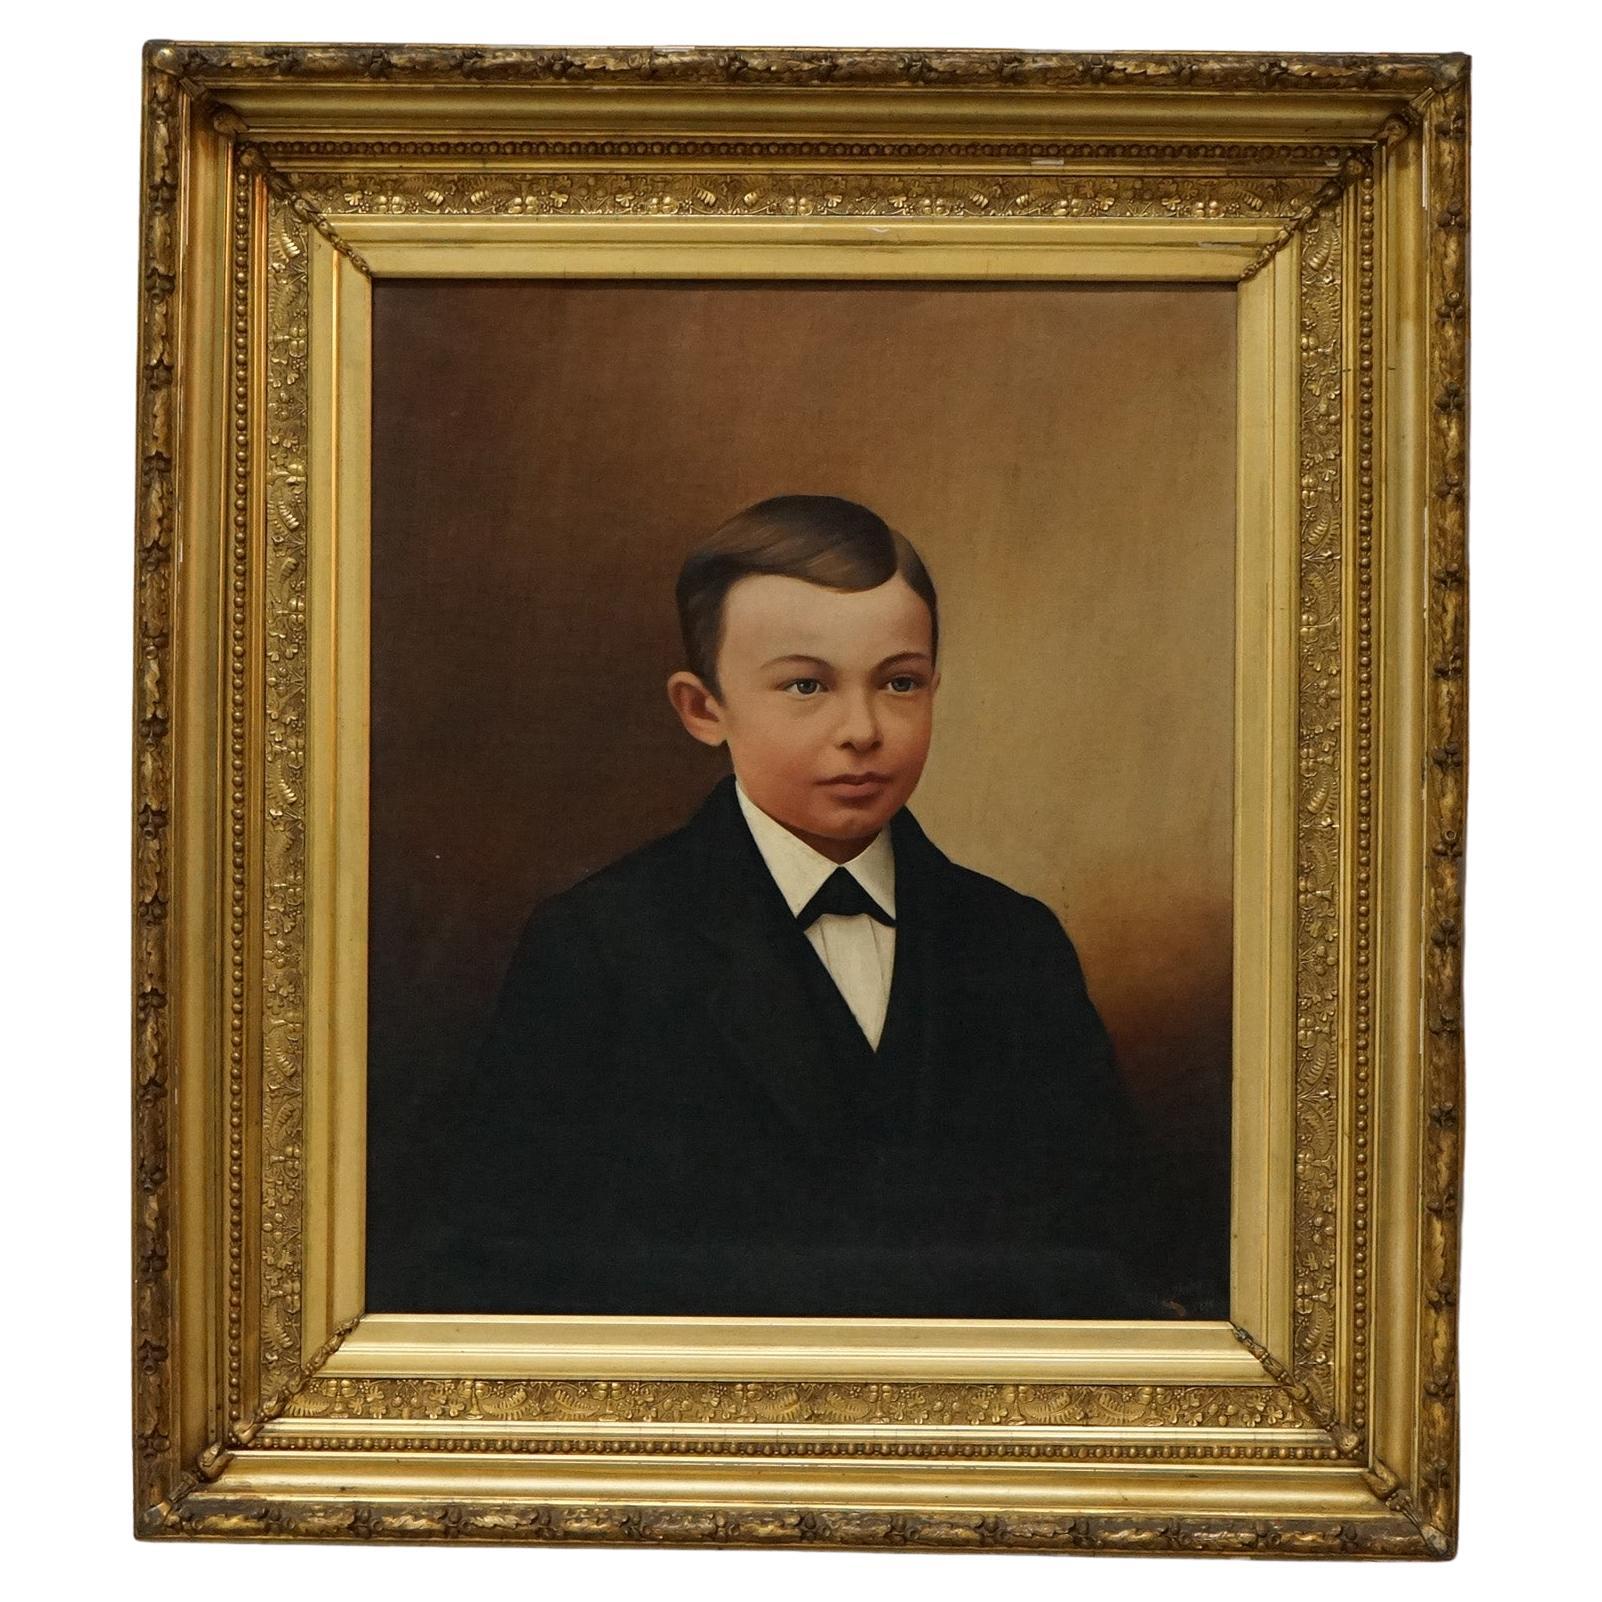 Antique Oil Painting, Portrait of a Young Boy by S.B. Shiley, c1880 For Sale